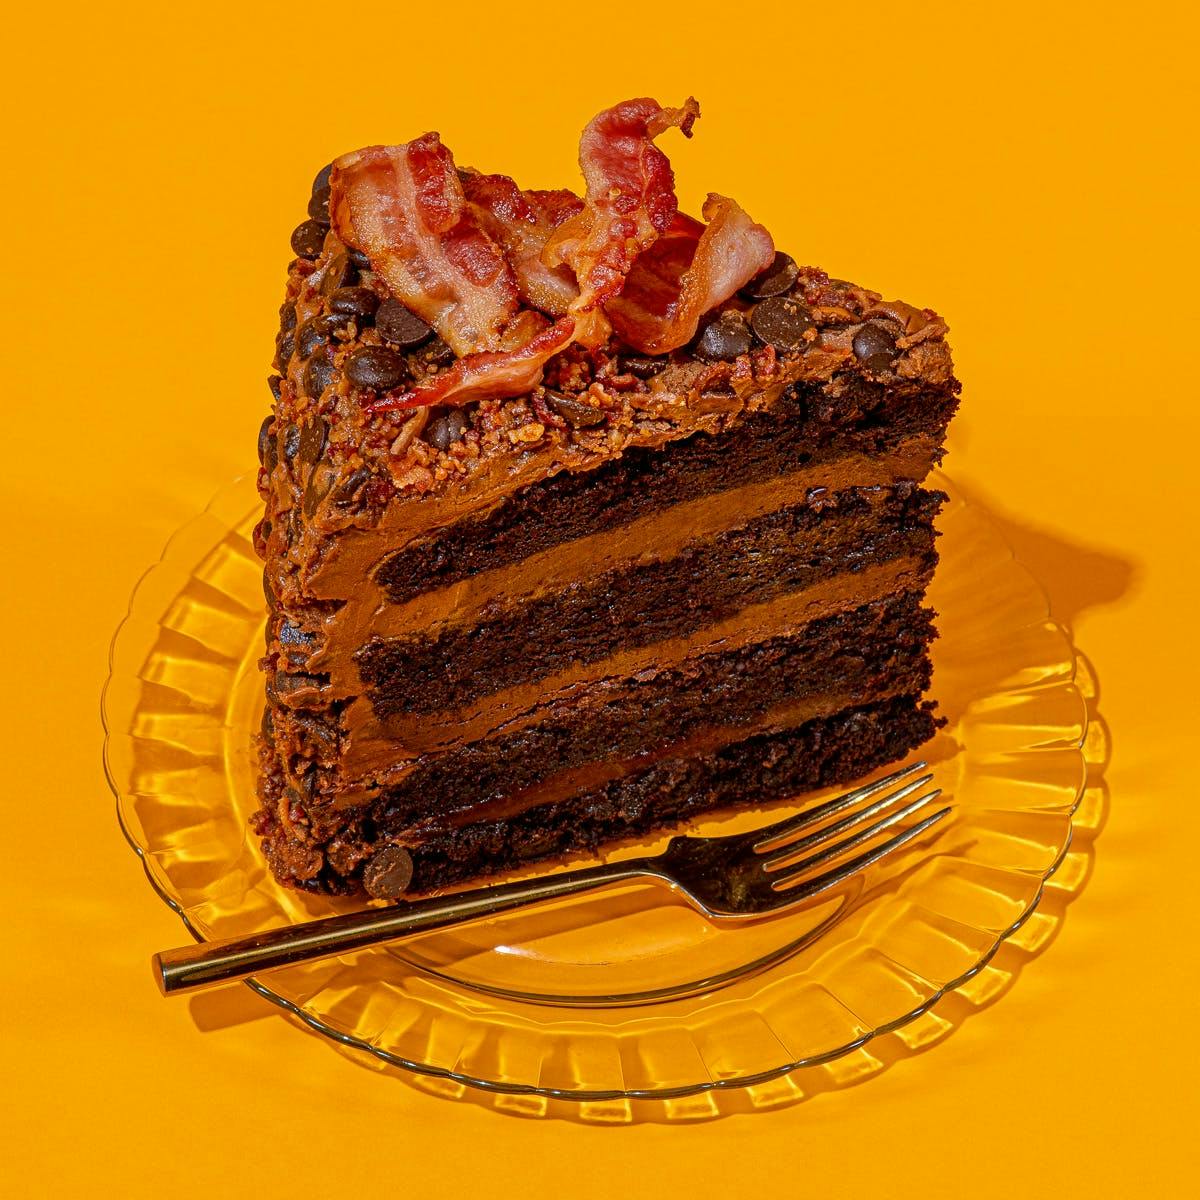 Candied Bacon Recipe & VIDEO